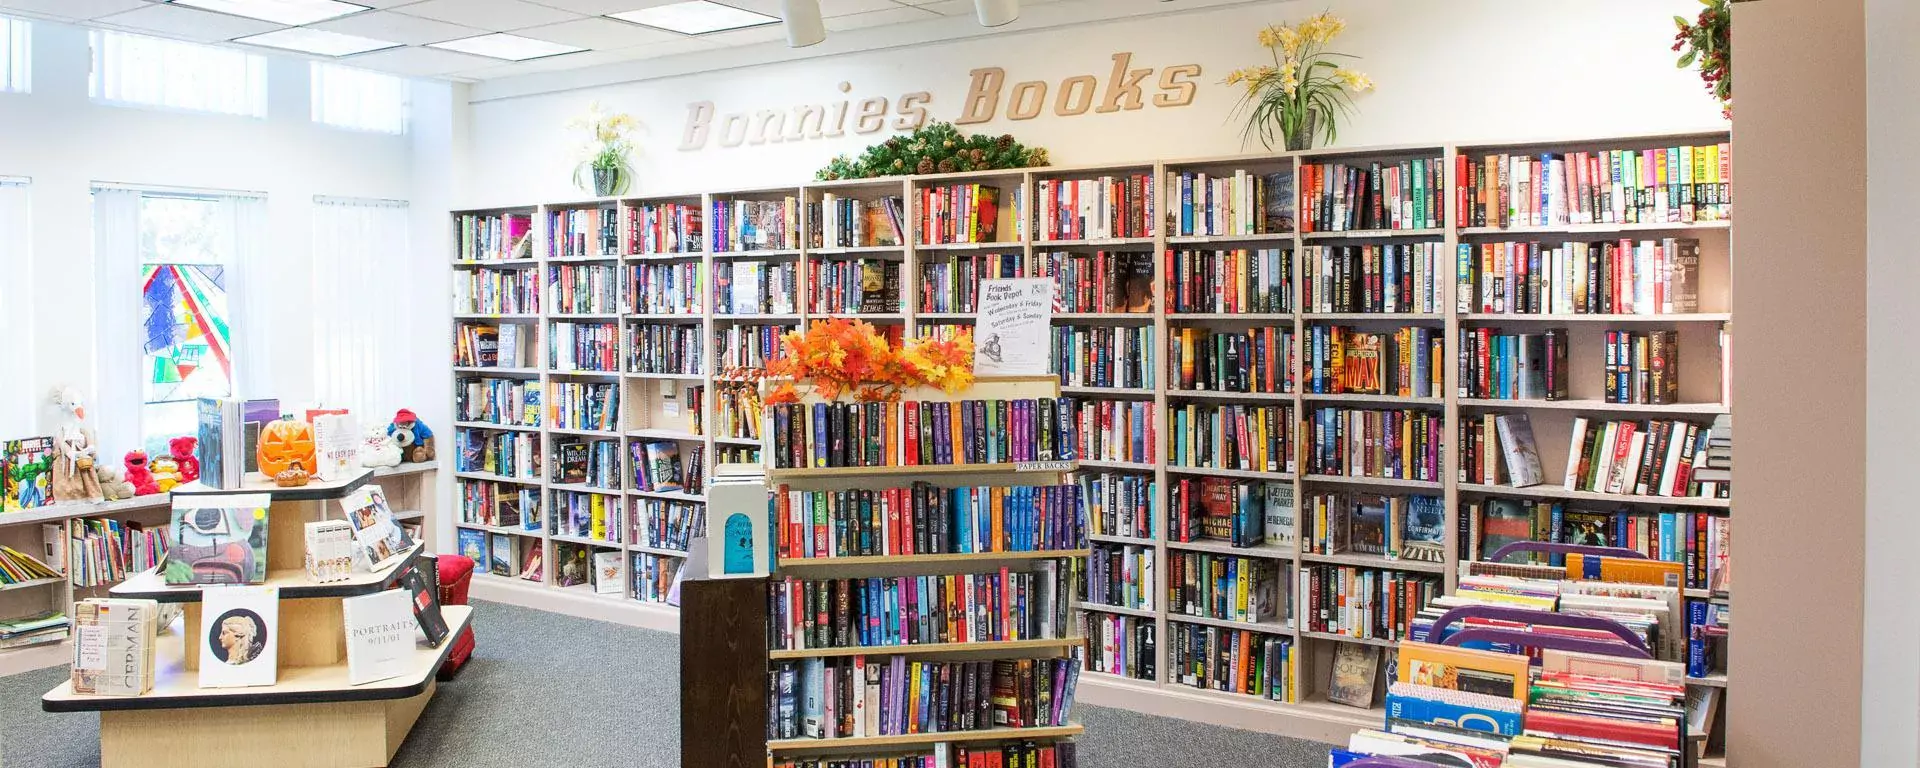 Picture of book shelves at Bonnie's books store